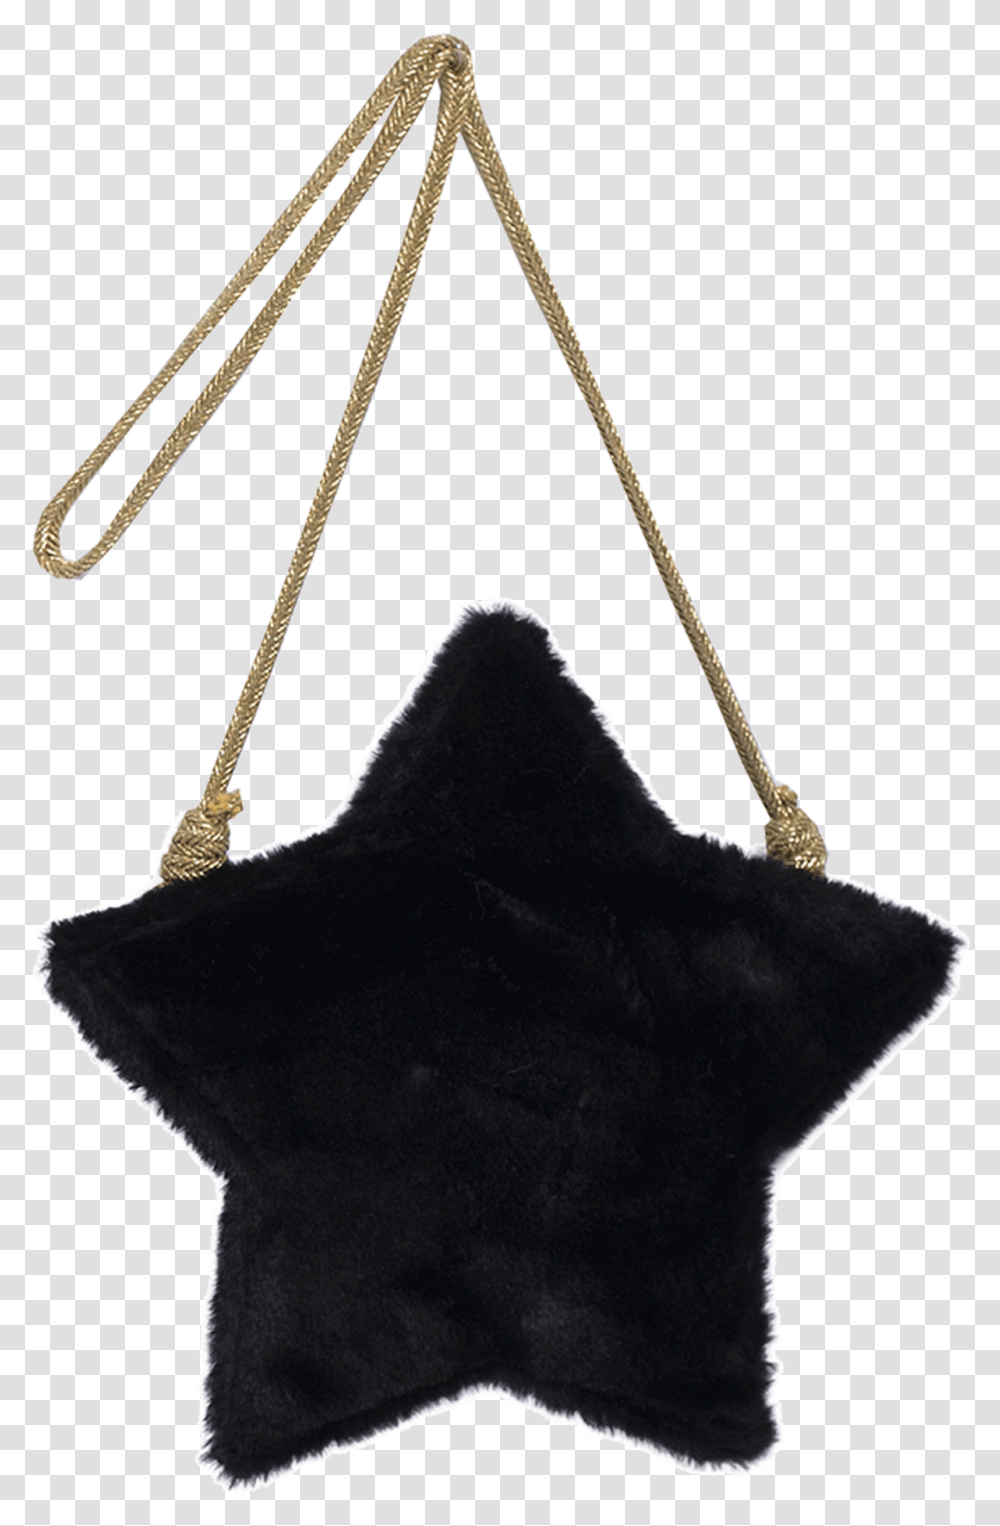 Black Faux Fur Girls Purse In The Shape Of A Star With Shoulder Bag, Tripod, Triangle, Silhouette Transparent Png